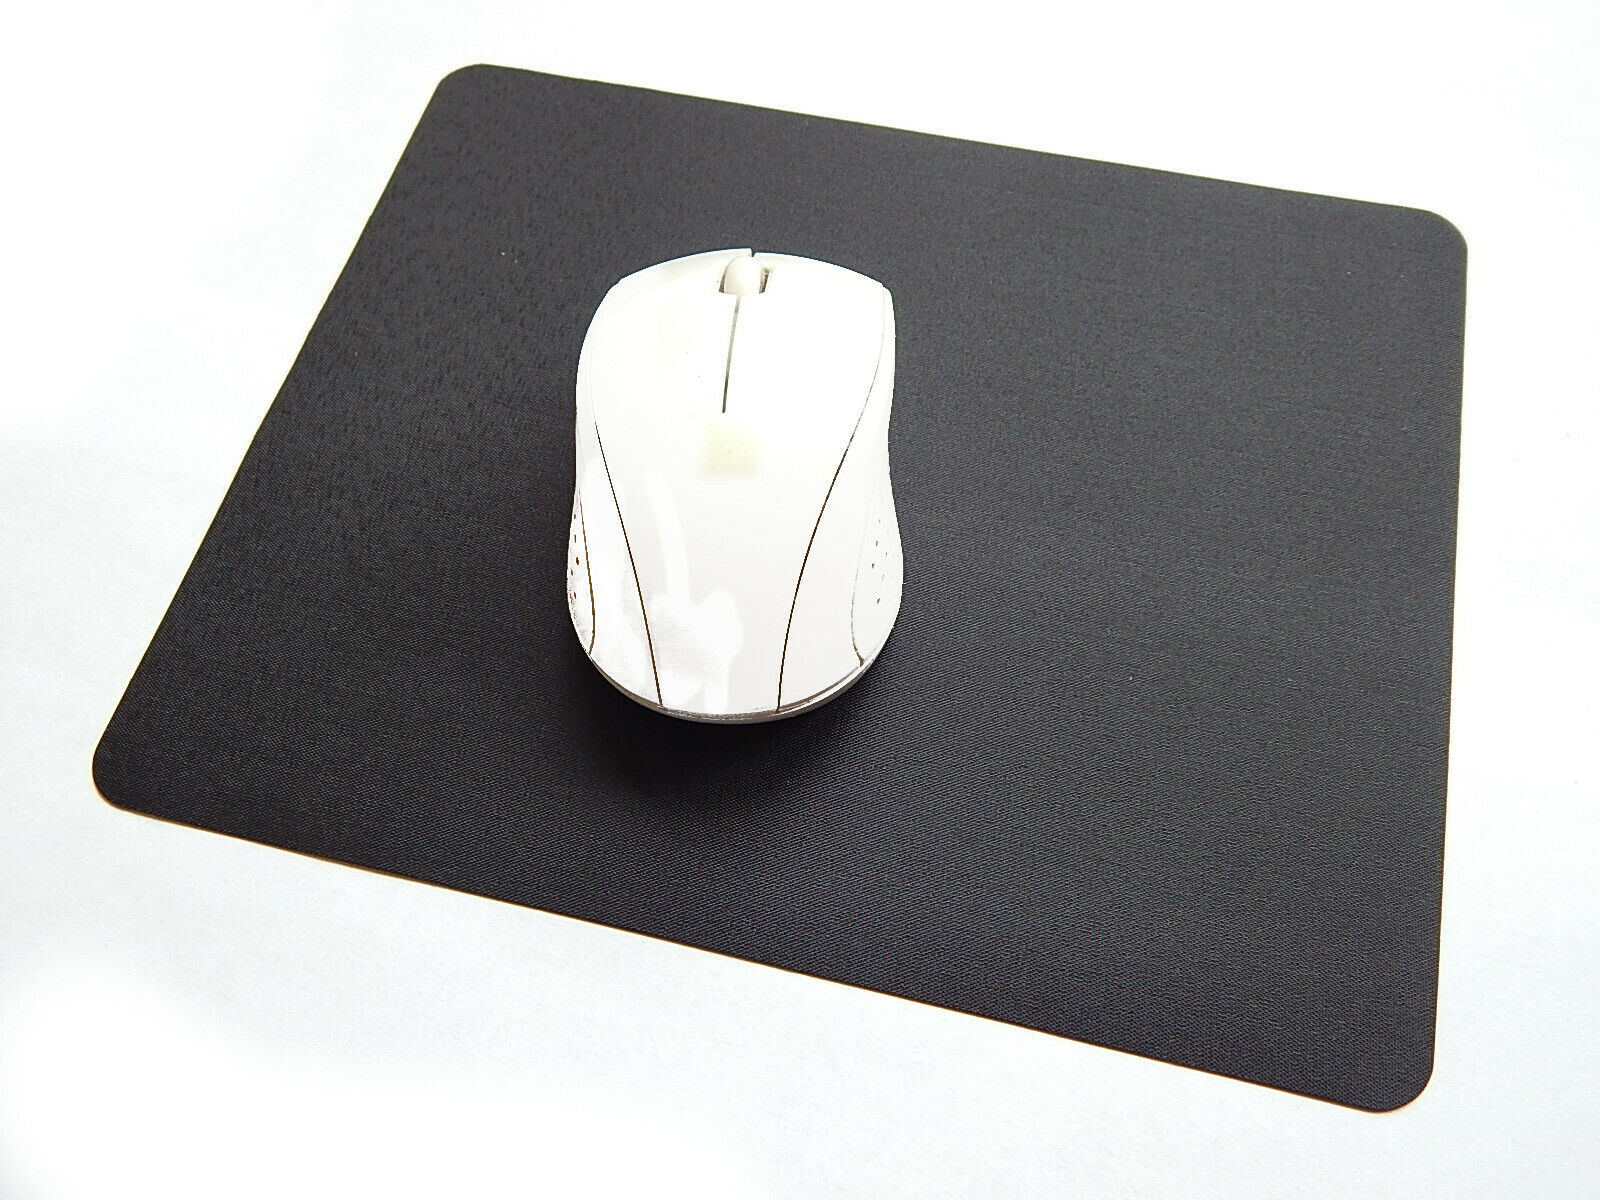 New Ultra-thin Optical Mousepad Anti-slip Black Mouse Pad Mats For Gaming Work